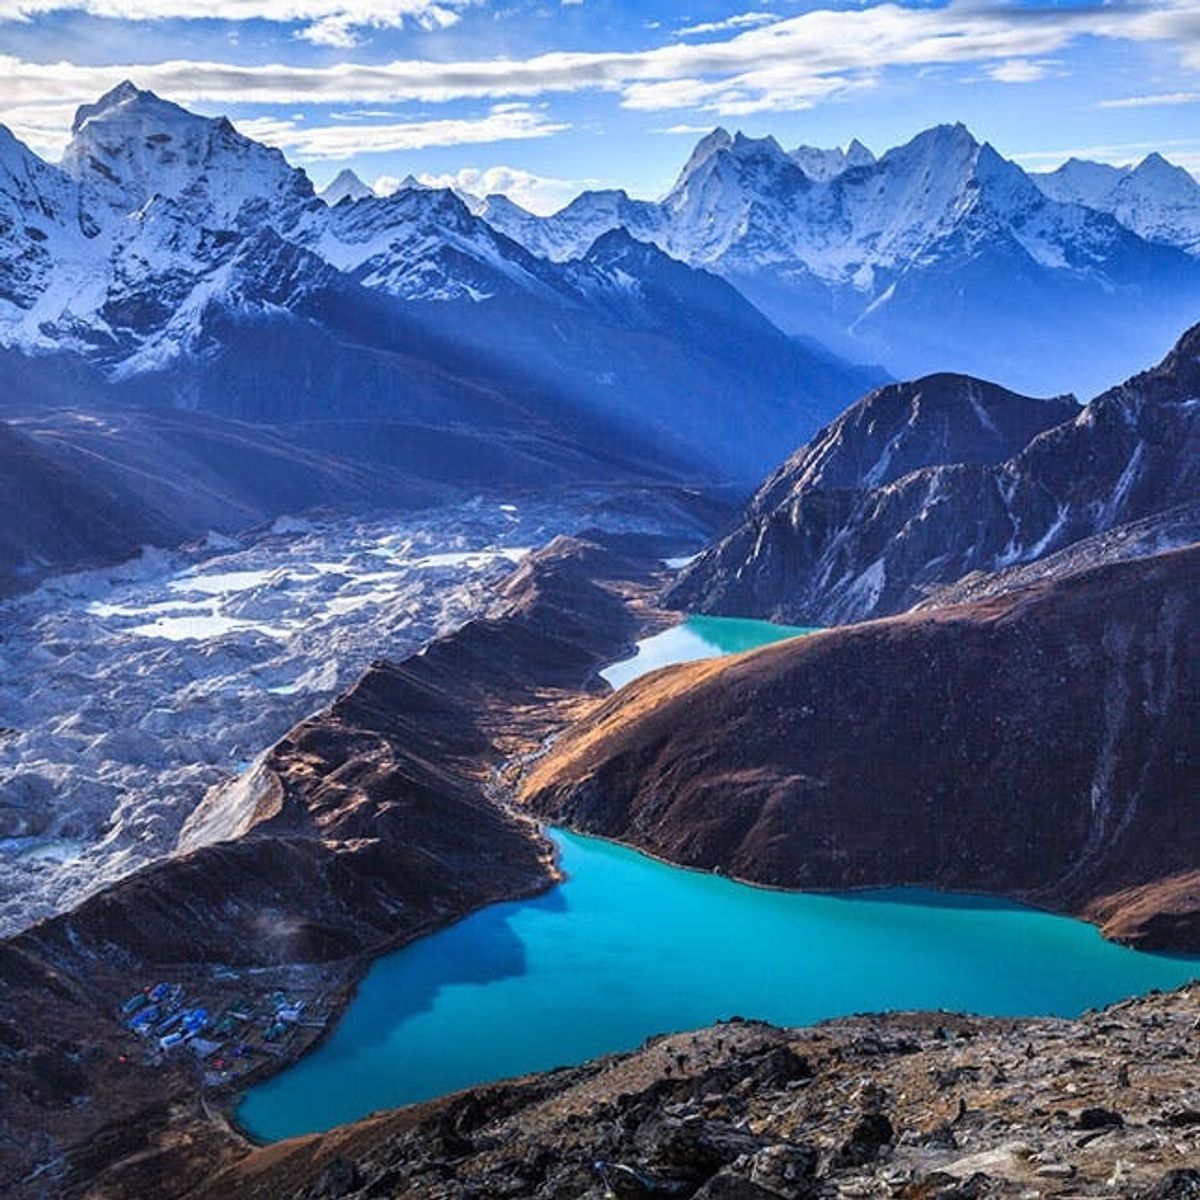 8 Spectacular Mountain Ranges You Need to Put on Your Bucket List